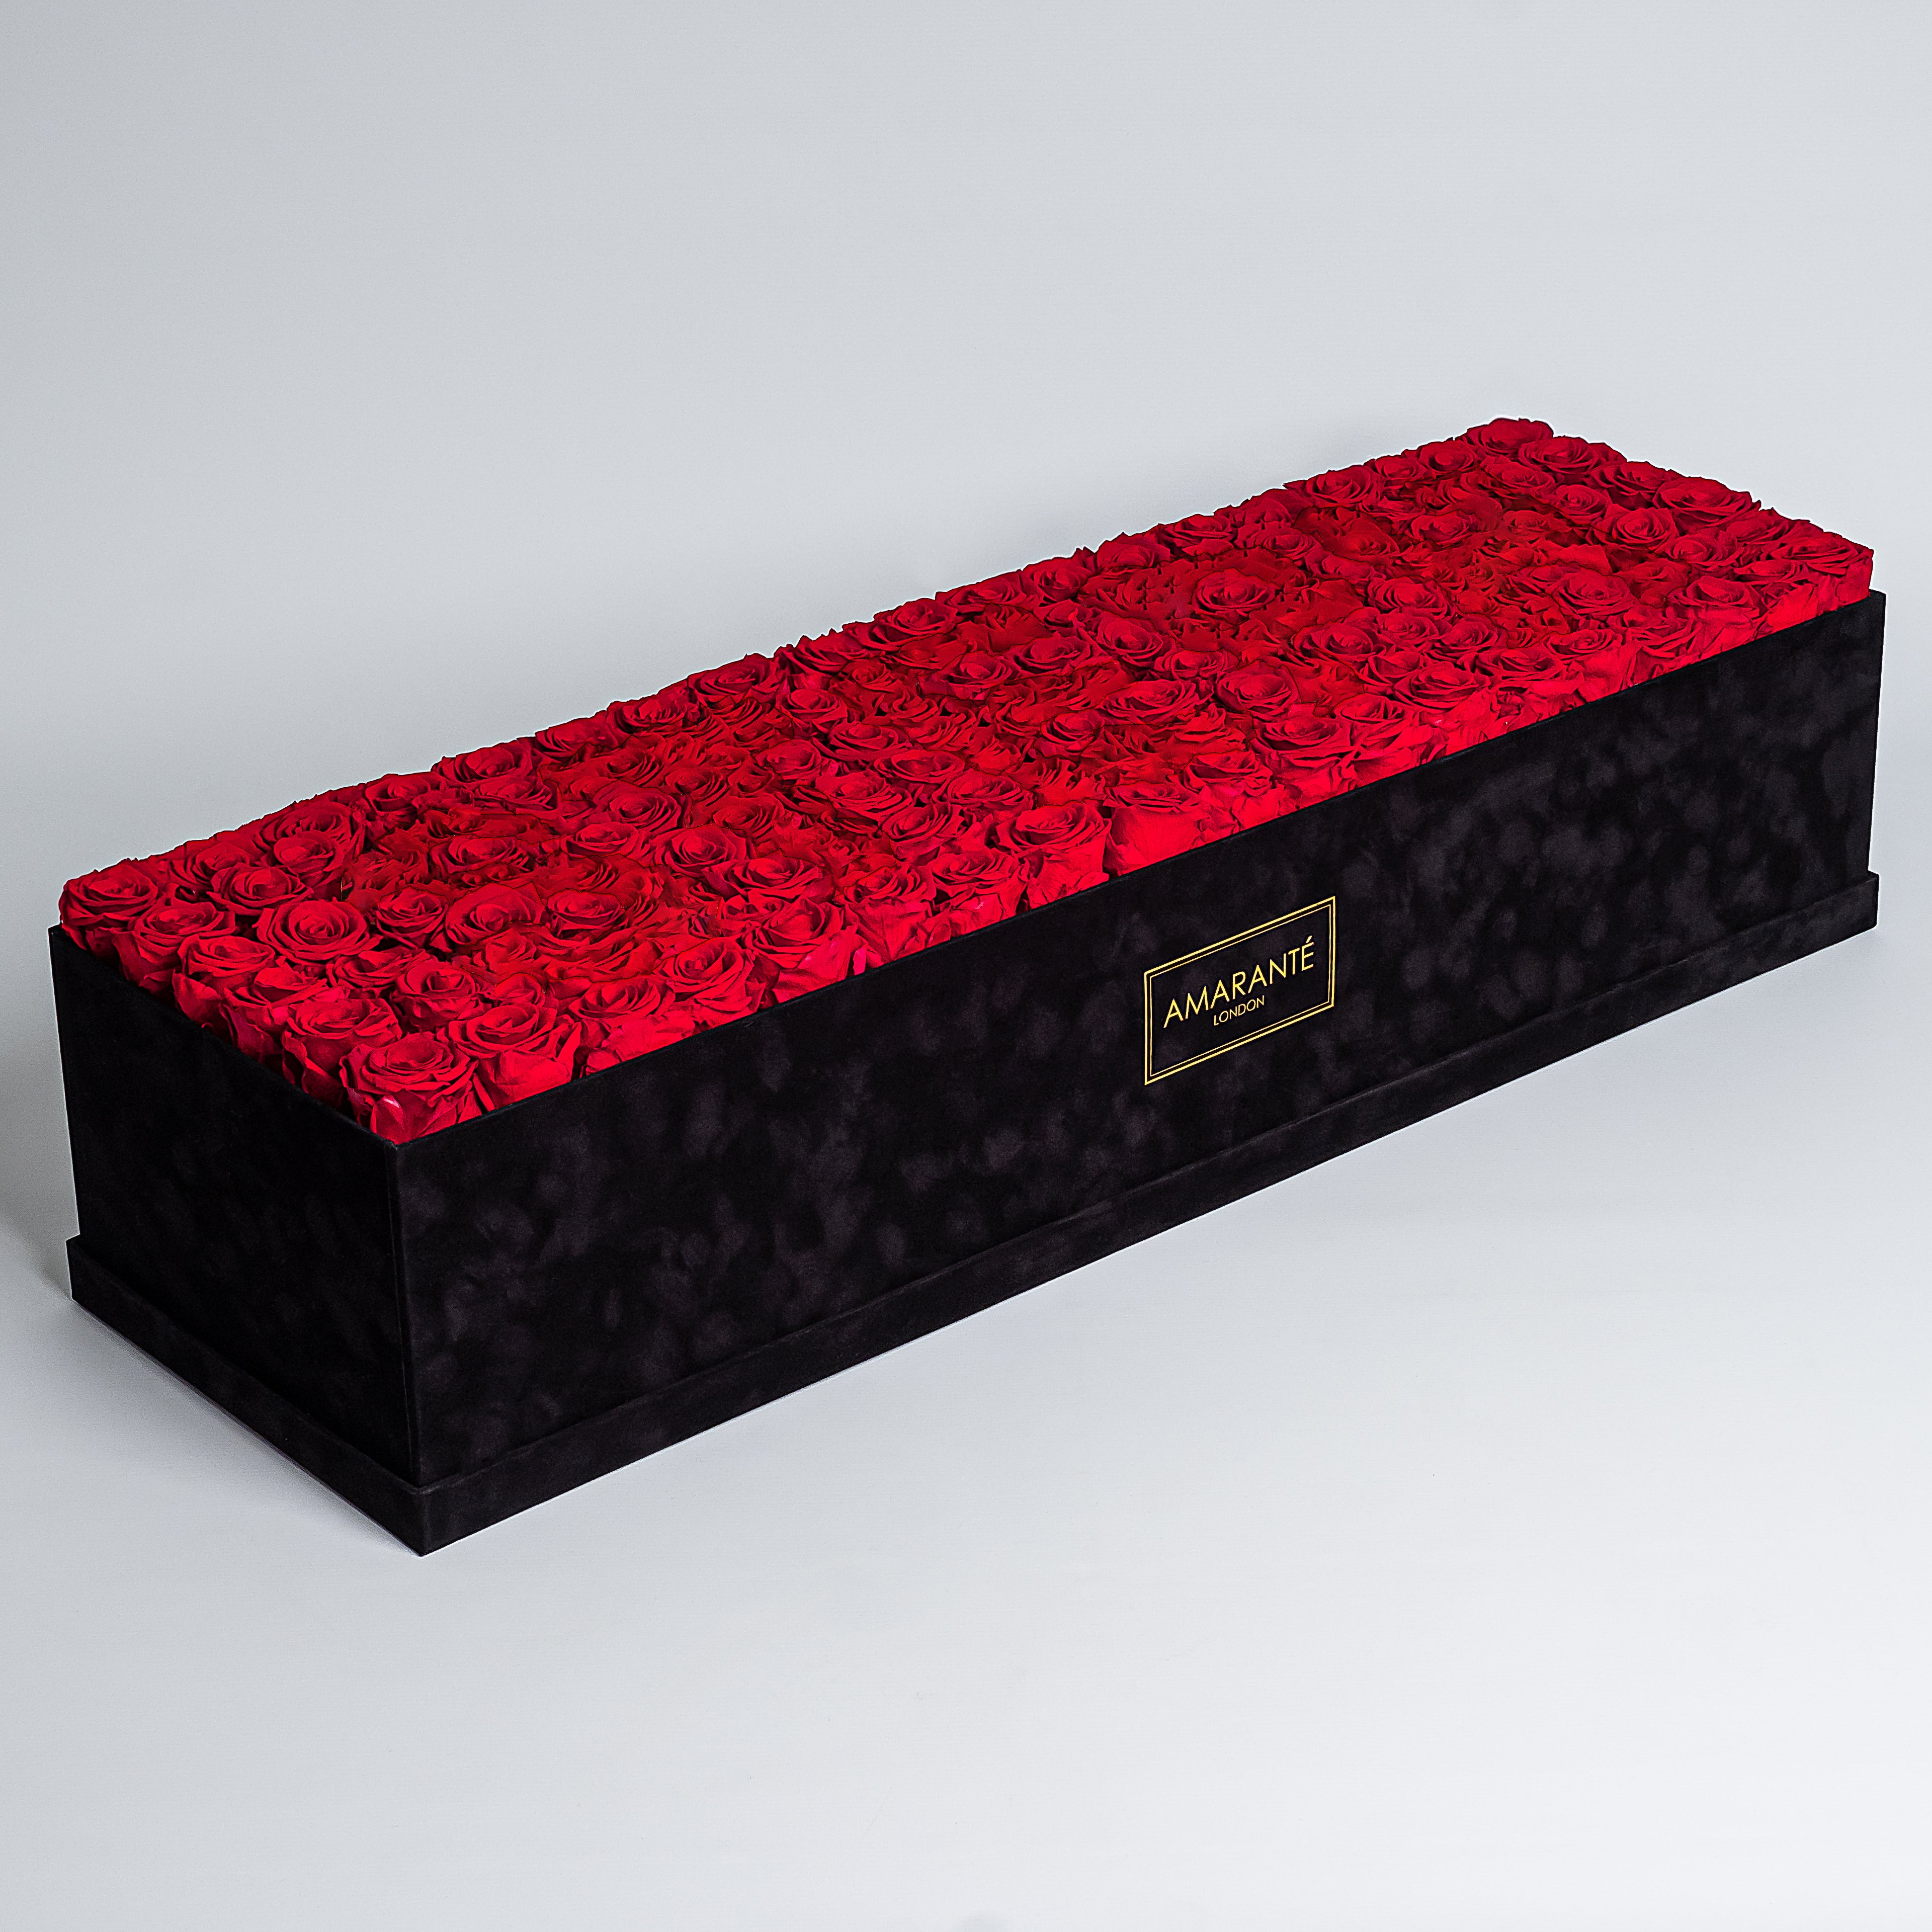 Sophisticated super deluxe black rectangular suede rose box, elegantly filled with 140 pink infinity roses, epitome of timeless love. Free UK delivery, 30"x25", luxury rose box customisable with roses in 14 delicate pastel shades.